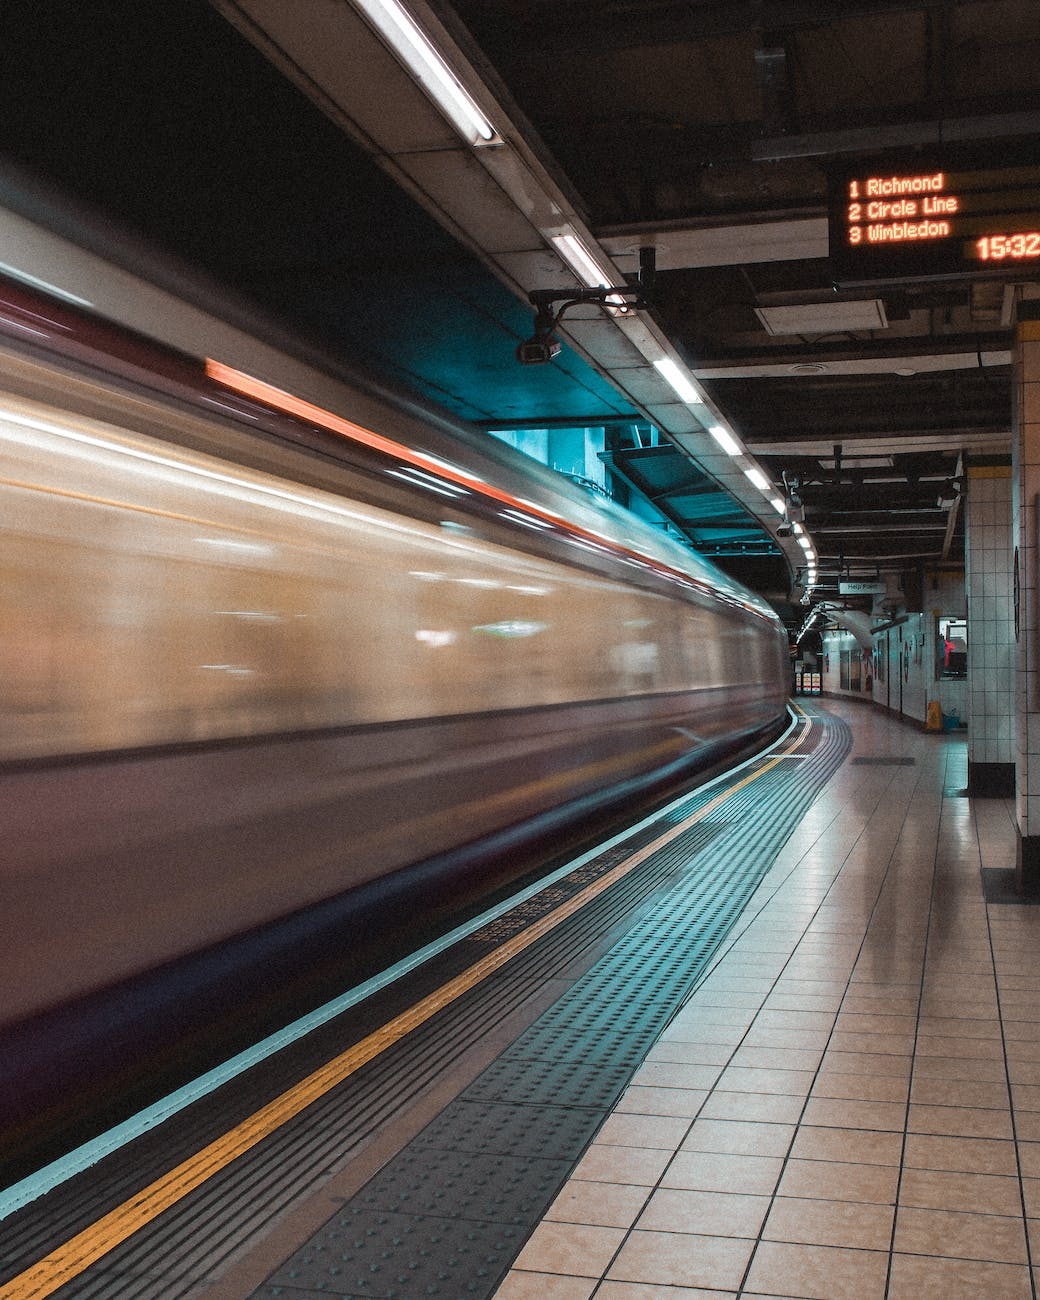 A subway train in motion